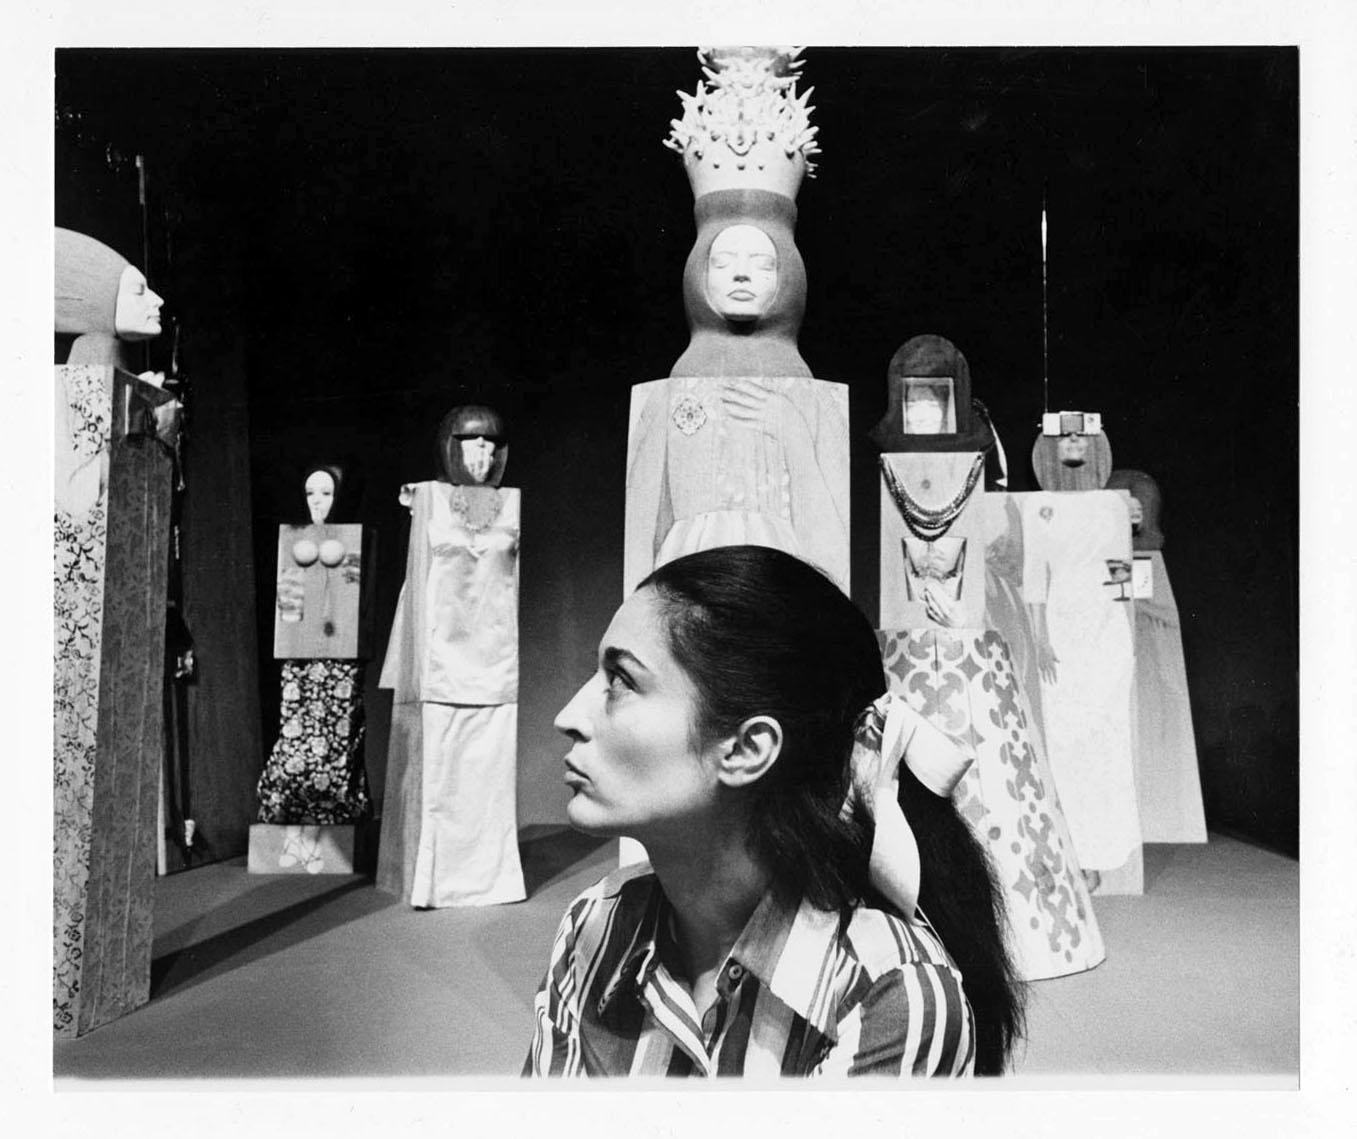 Jack Mitchell Black and White Photograph - Sculptor Marisol (Maria Sol Escobar) with her sculptures